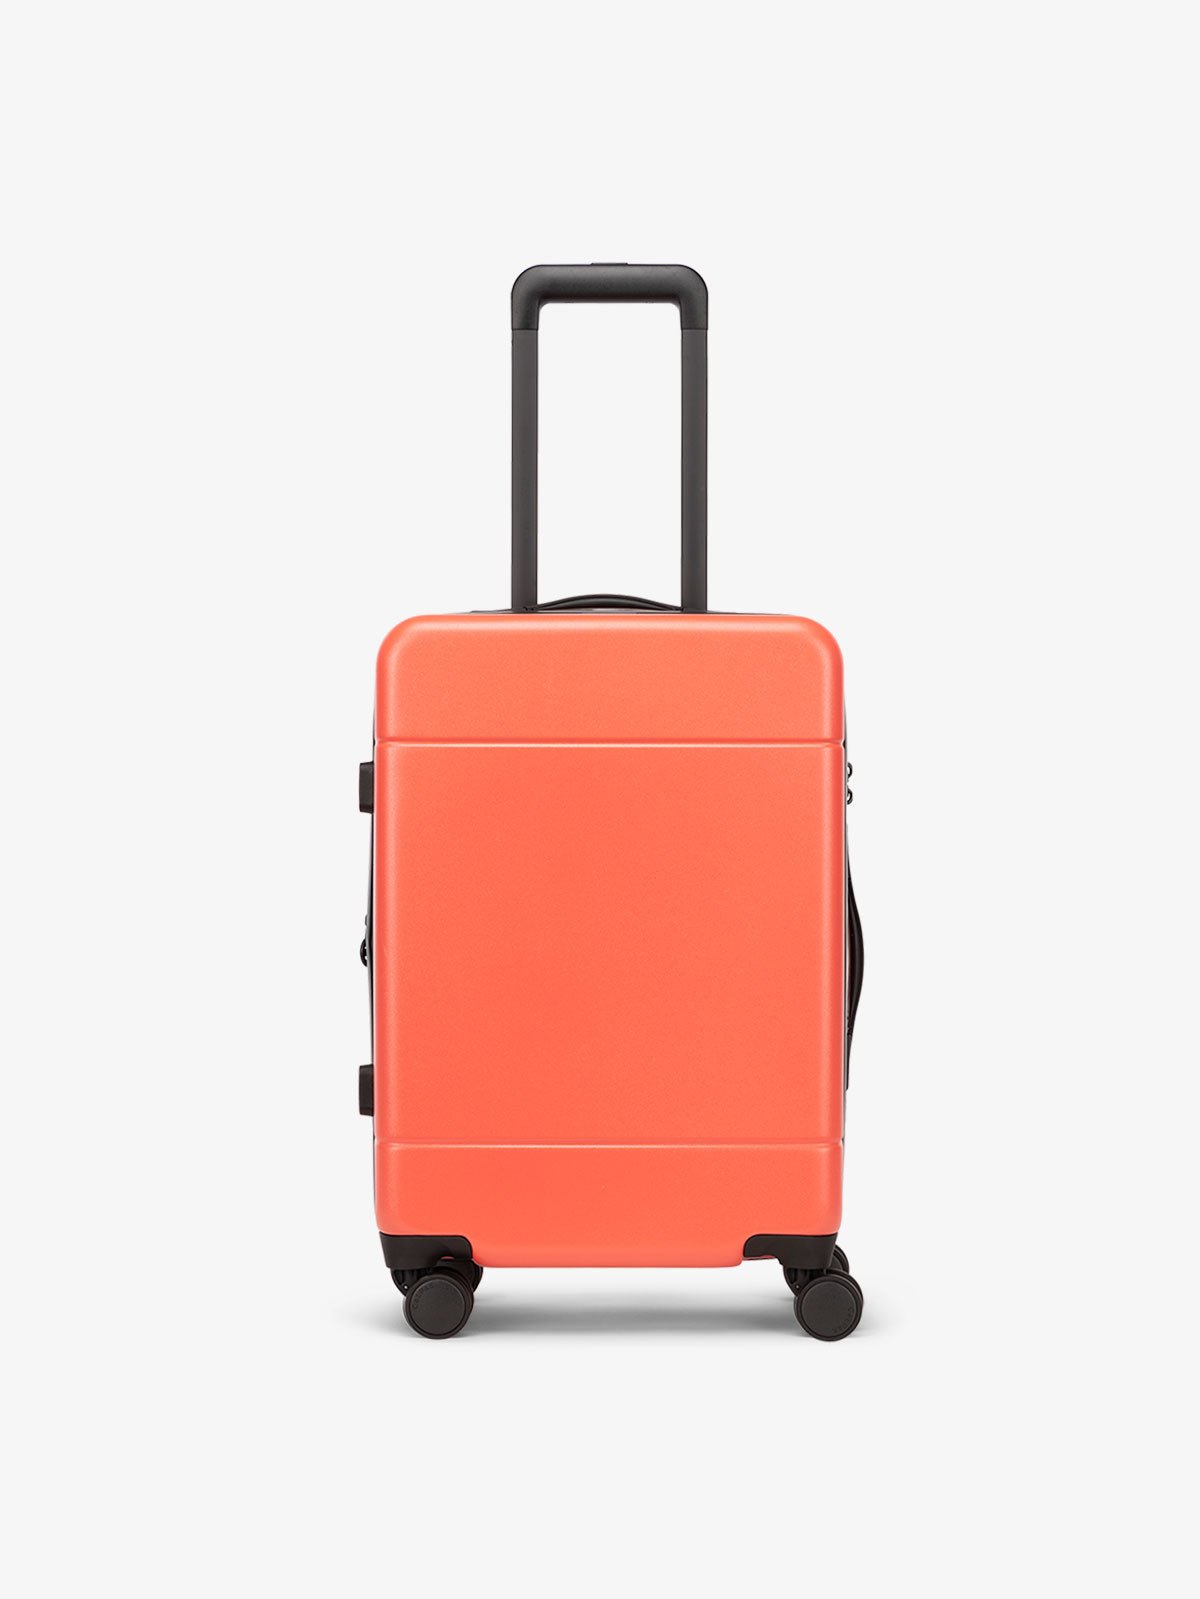 Hue hard shell rolling carry on luggage in red poppy color